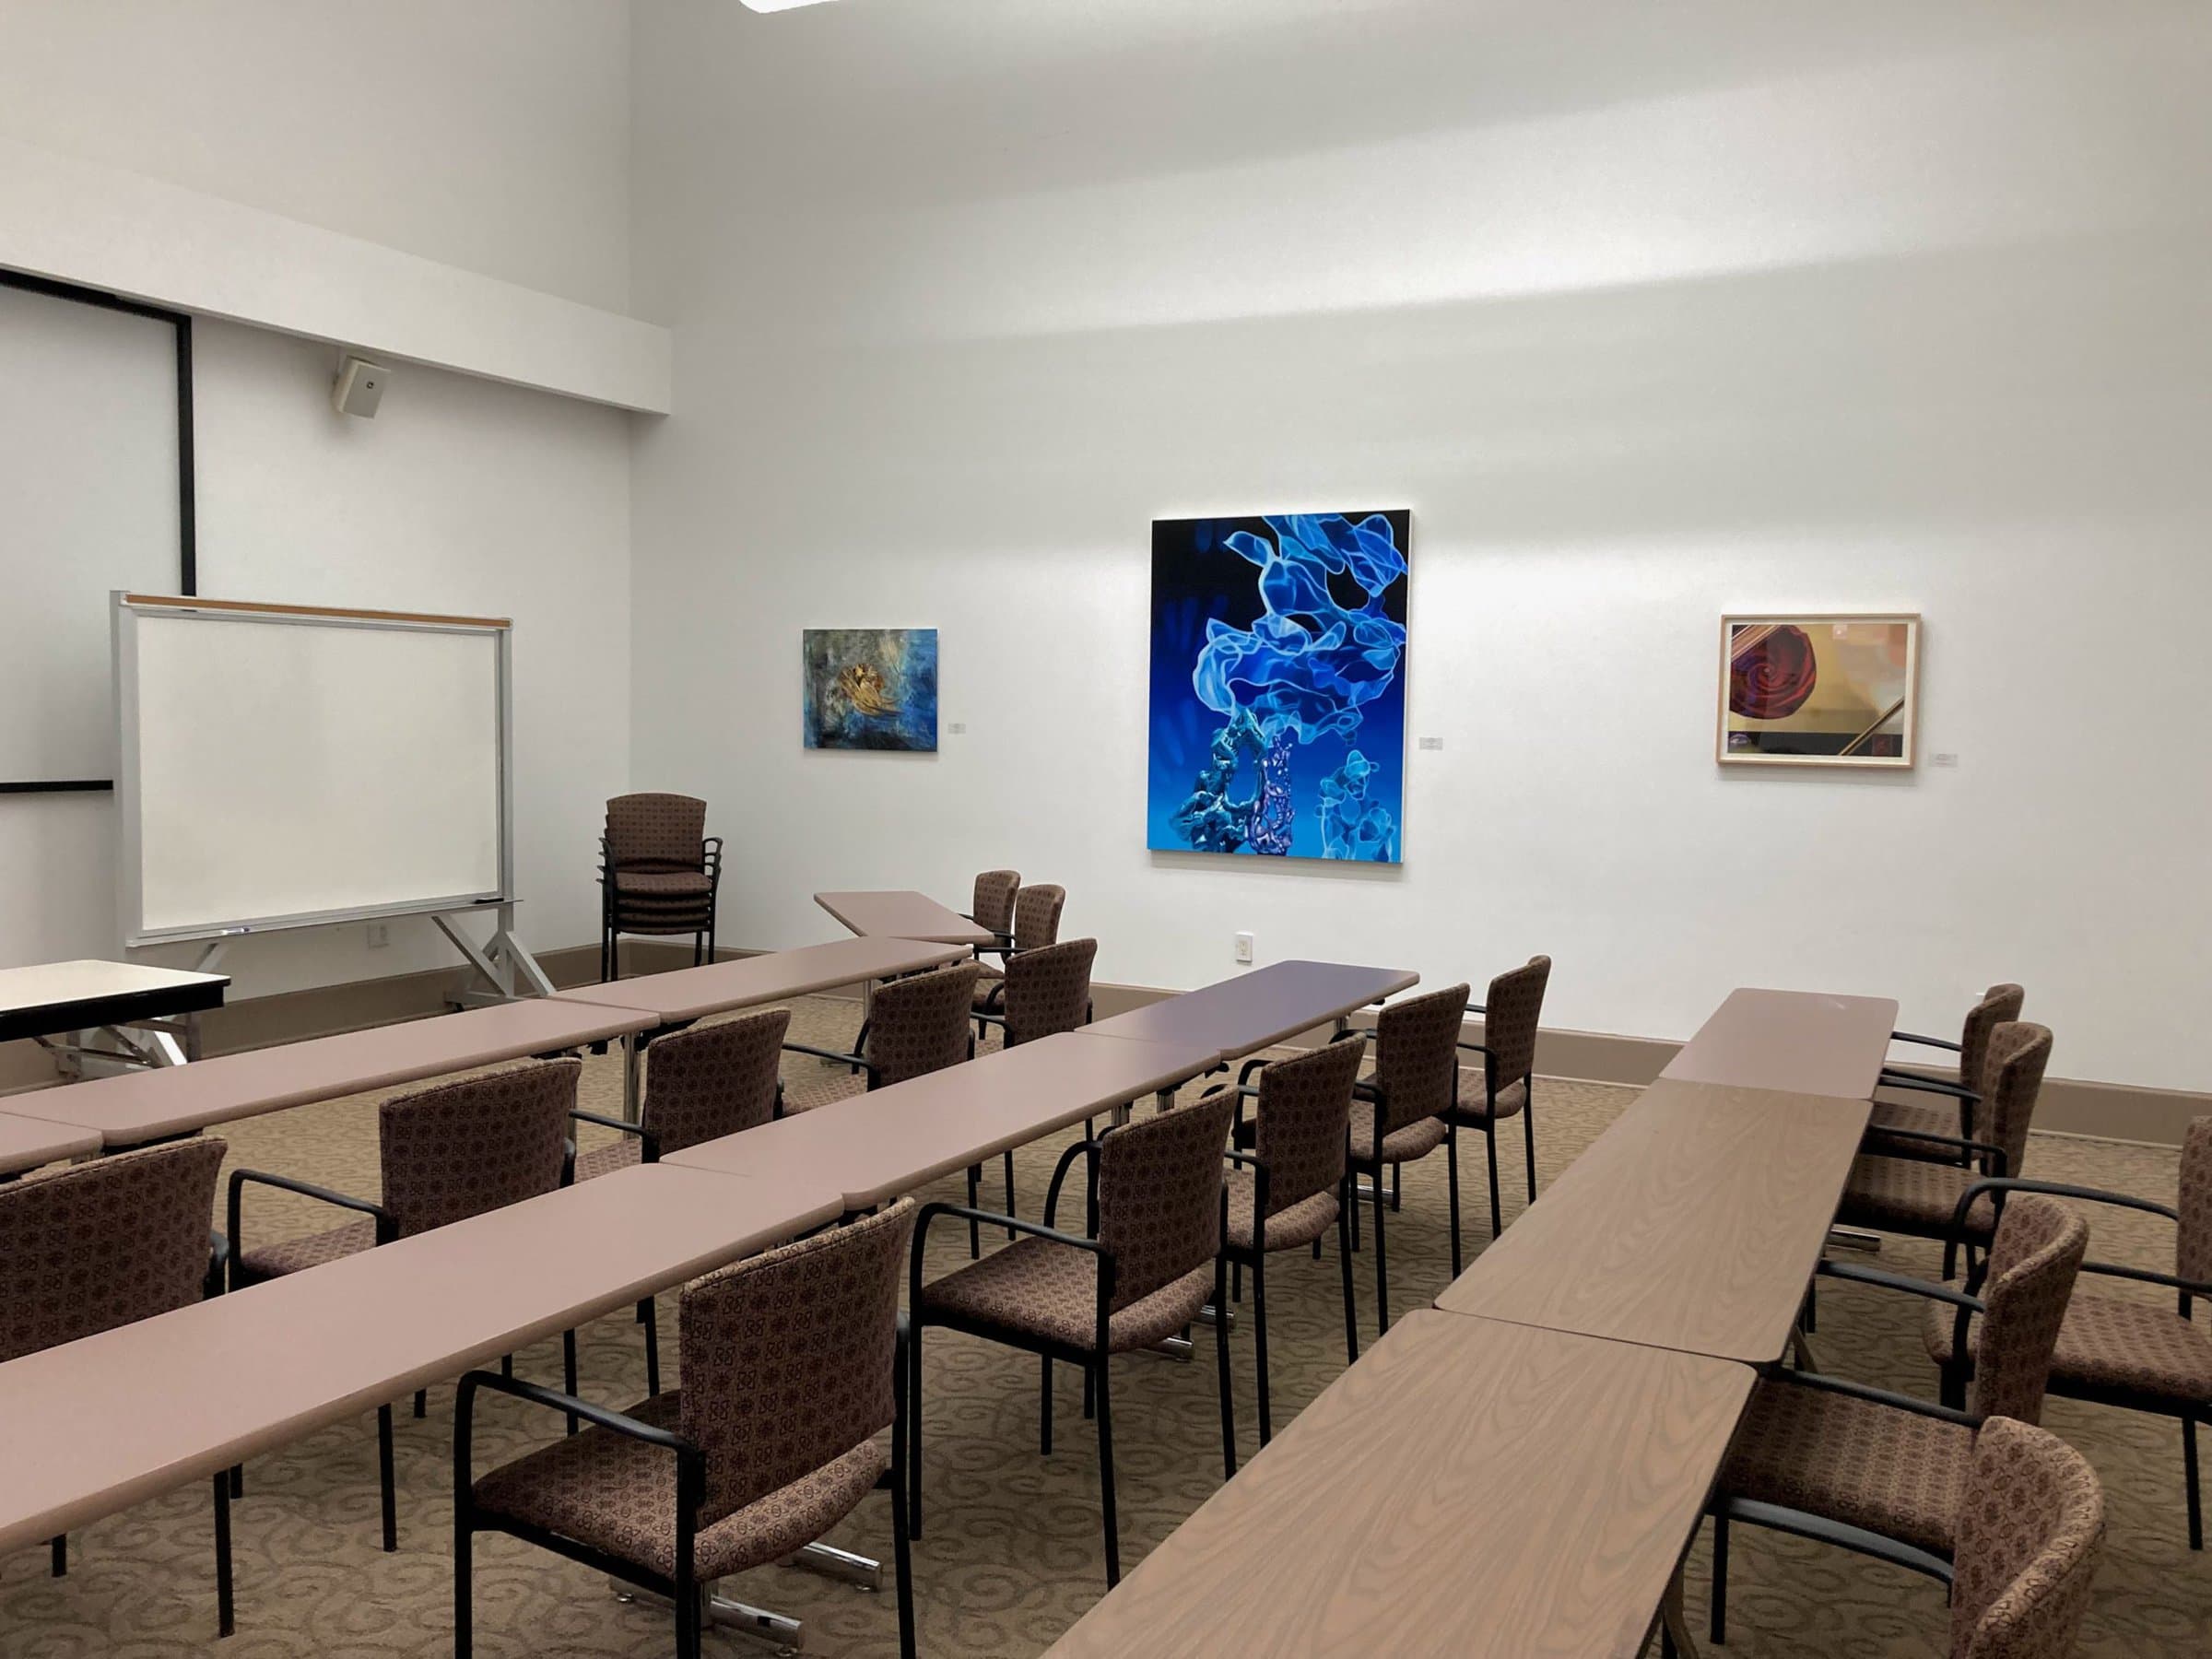 New installation of art pieces in Disque Lecture Hall